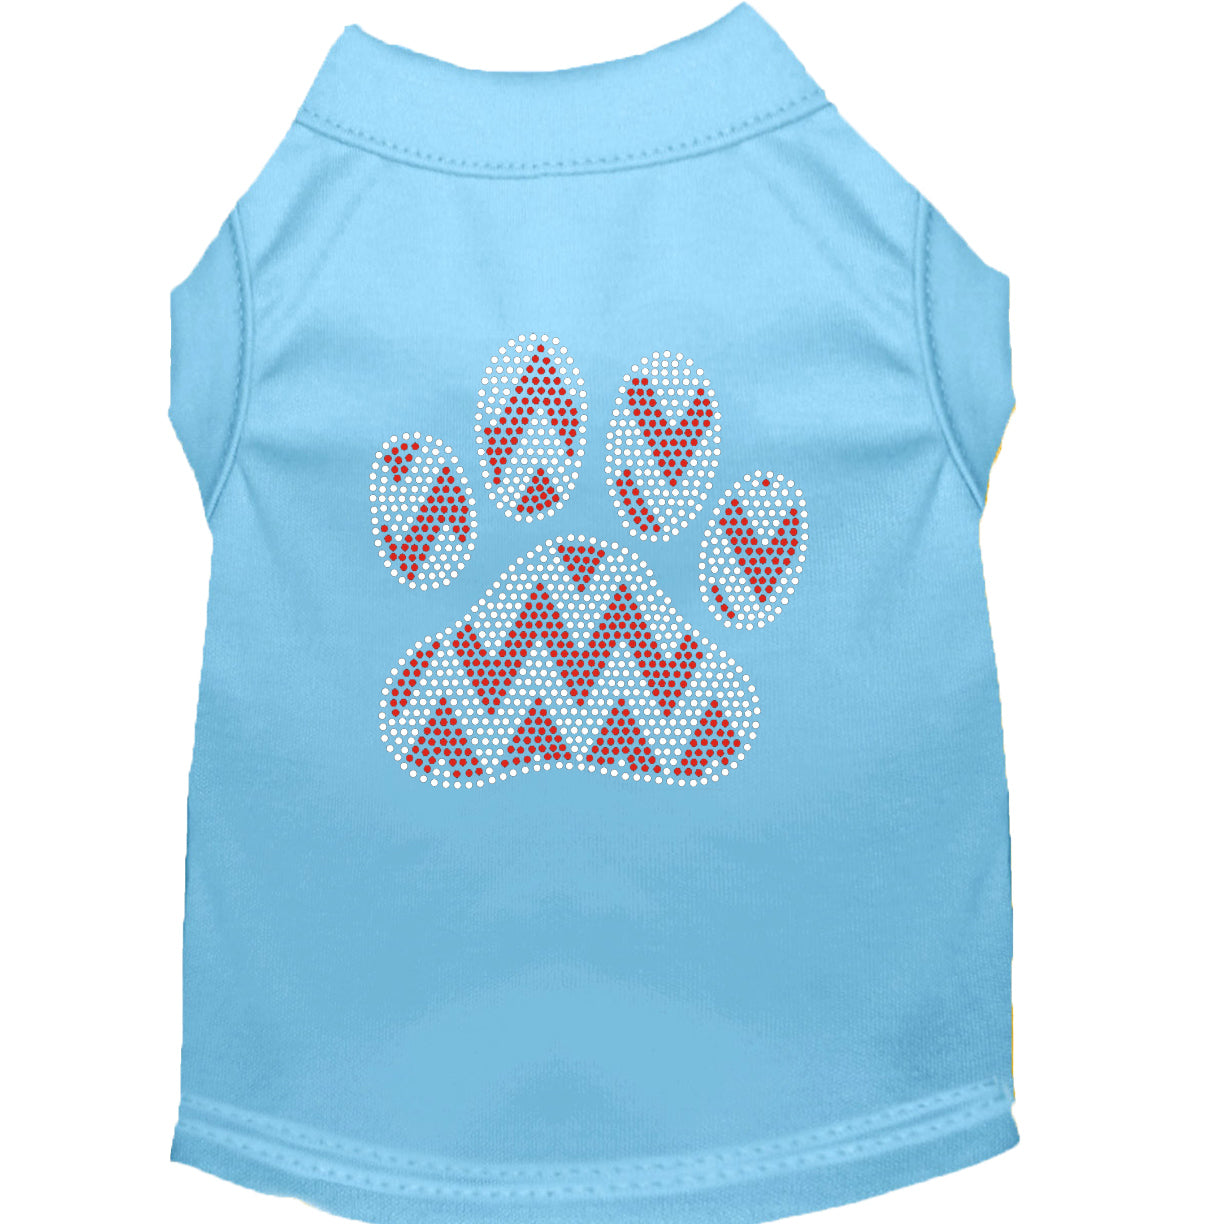 Candy Cane Chevron Paw Rhinestone Shirts for Cats and Dogs